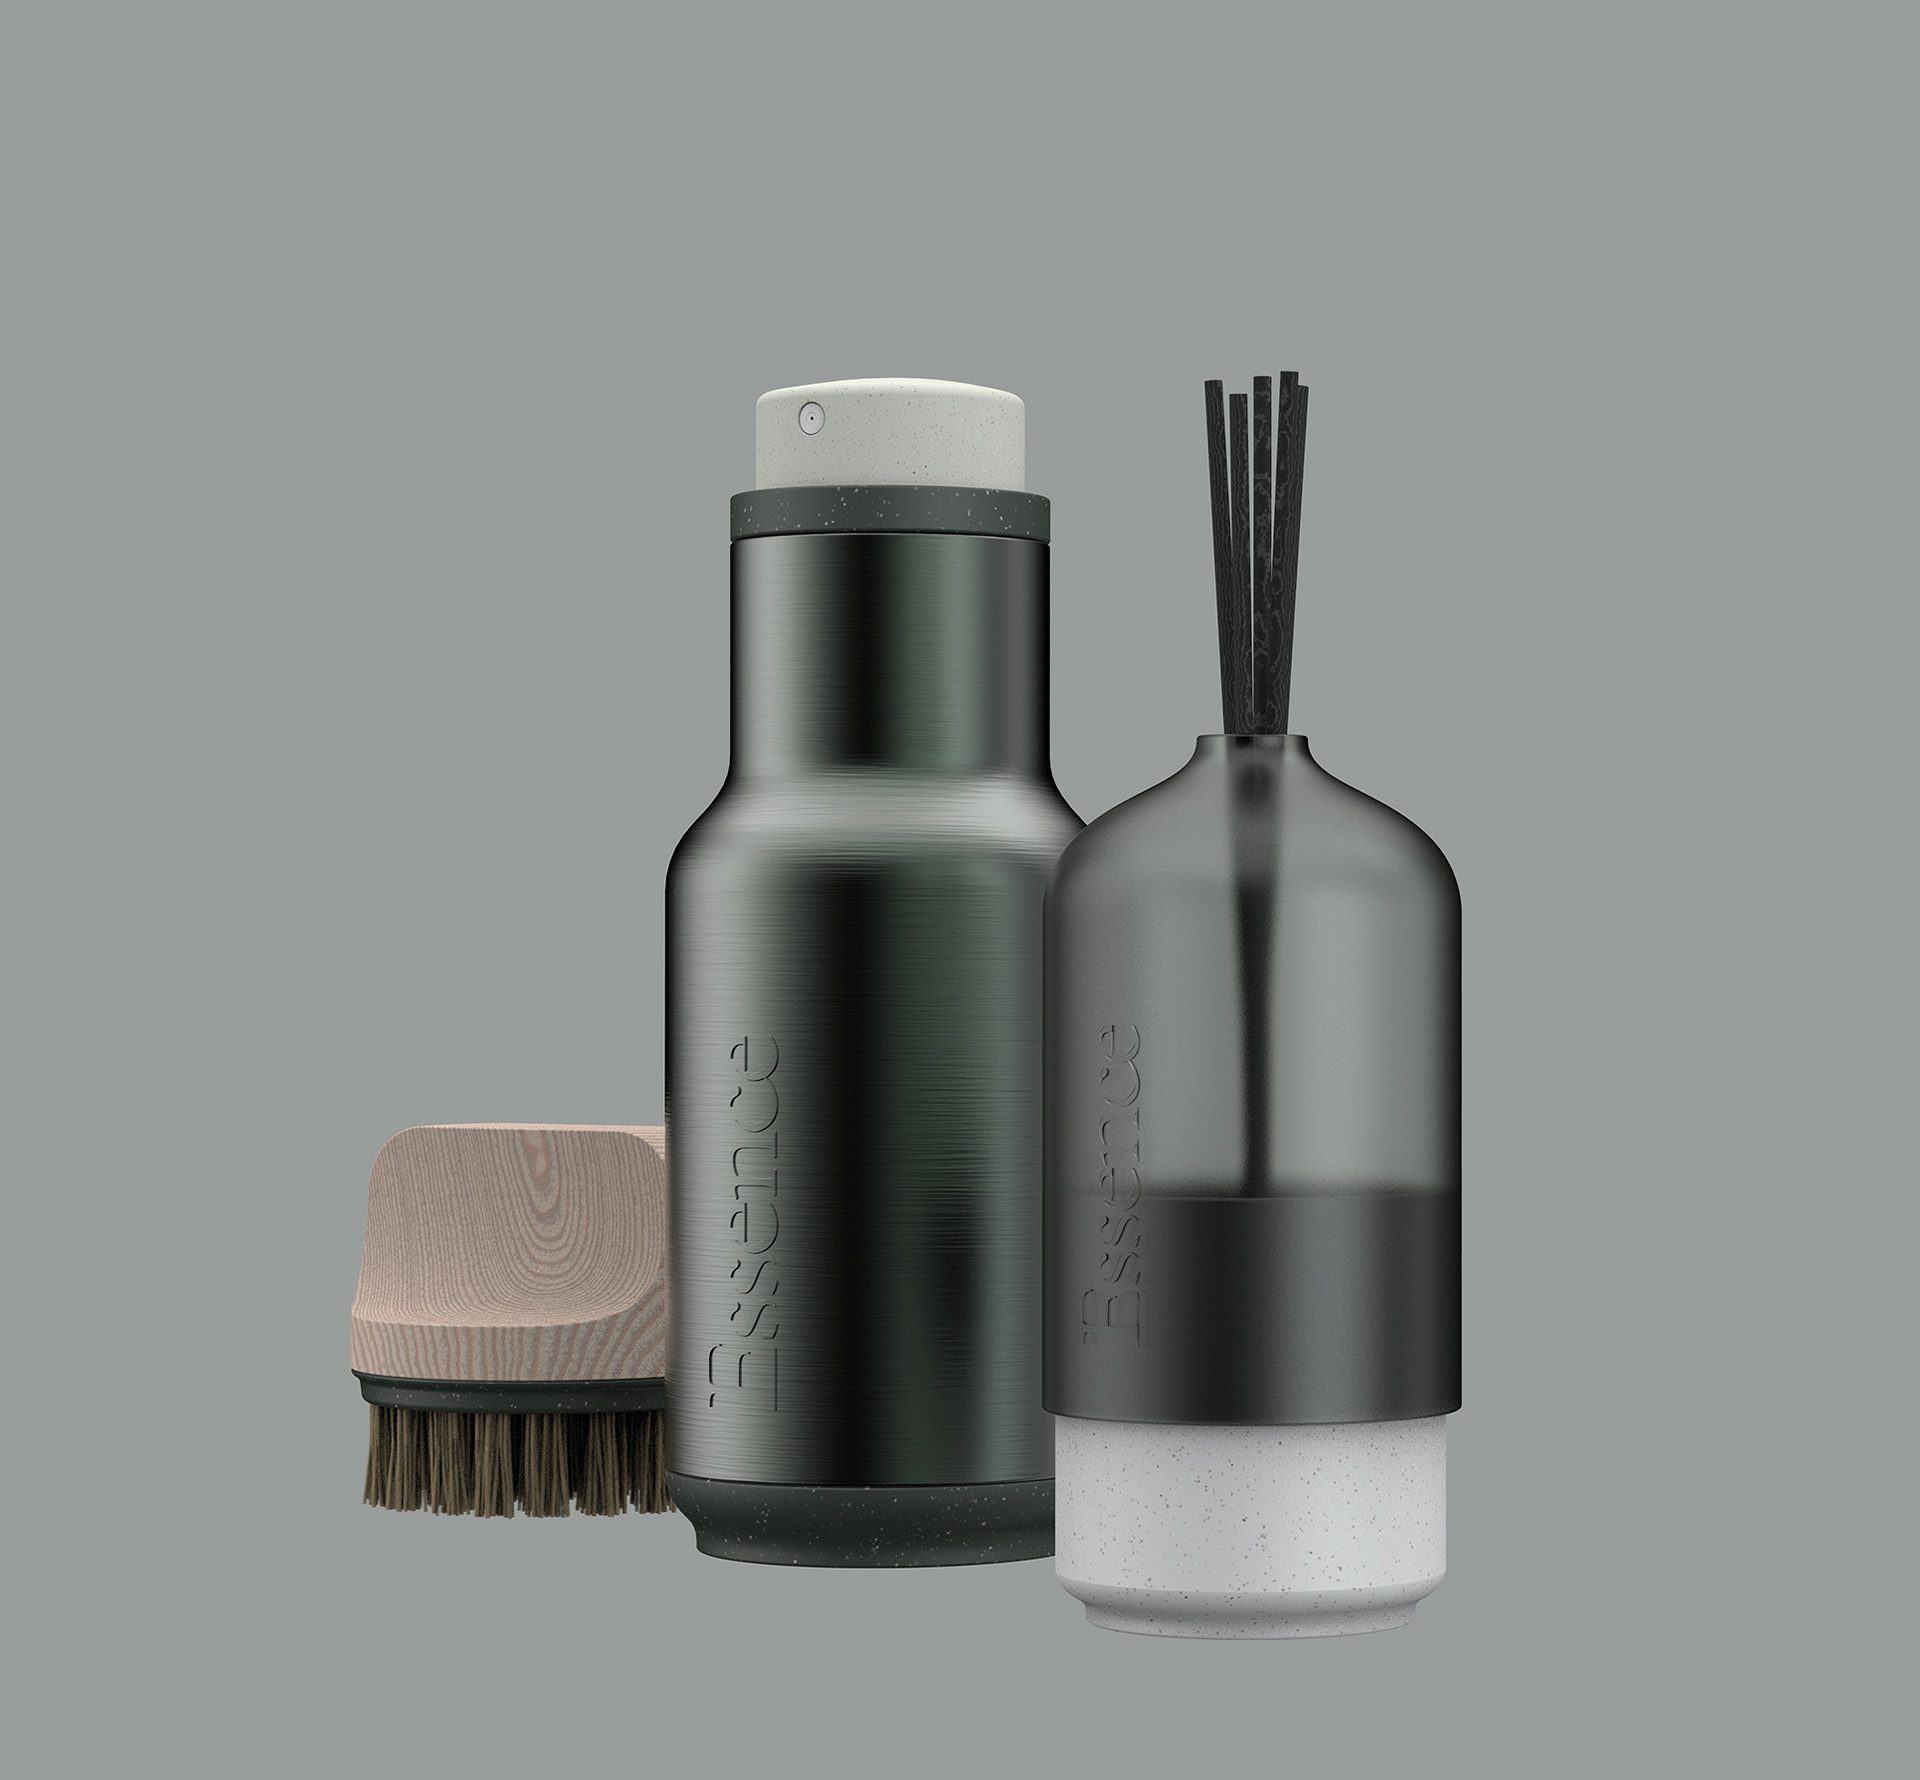 A render showing three Essence branded products on a grey green background